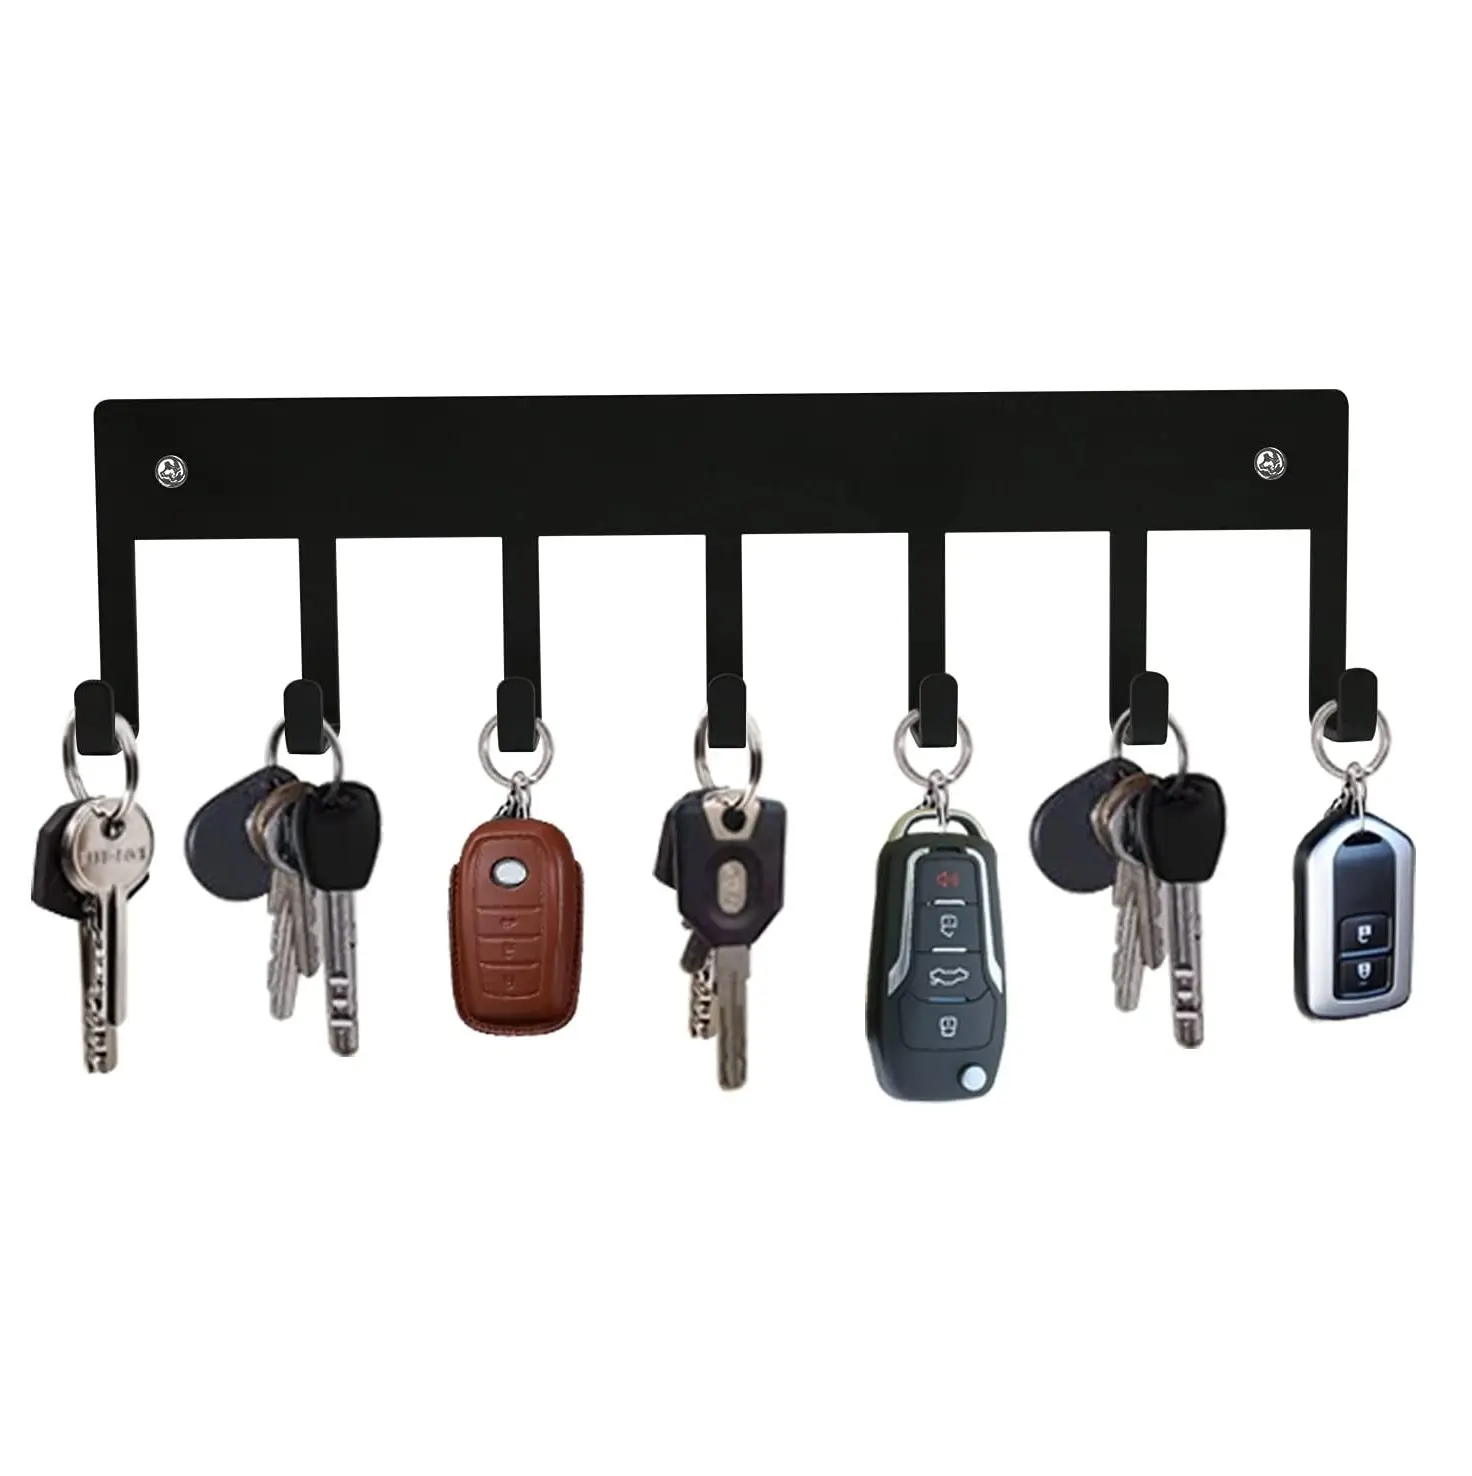 RUIMEI Key Organizer Rack with Screws and Sticker for Entryway, Kitchen, Bedroom, Organize Car Keys, House Keys and More